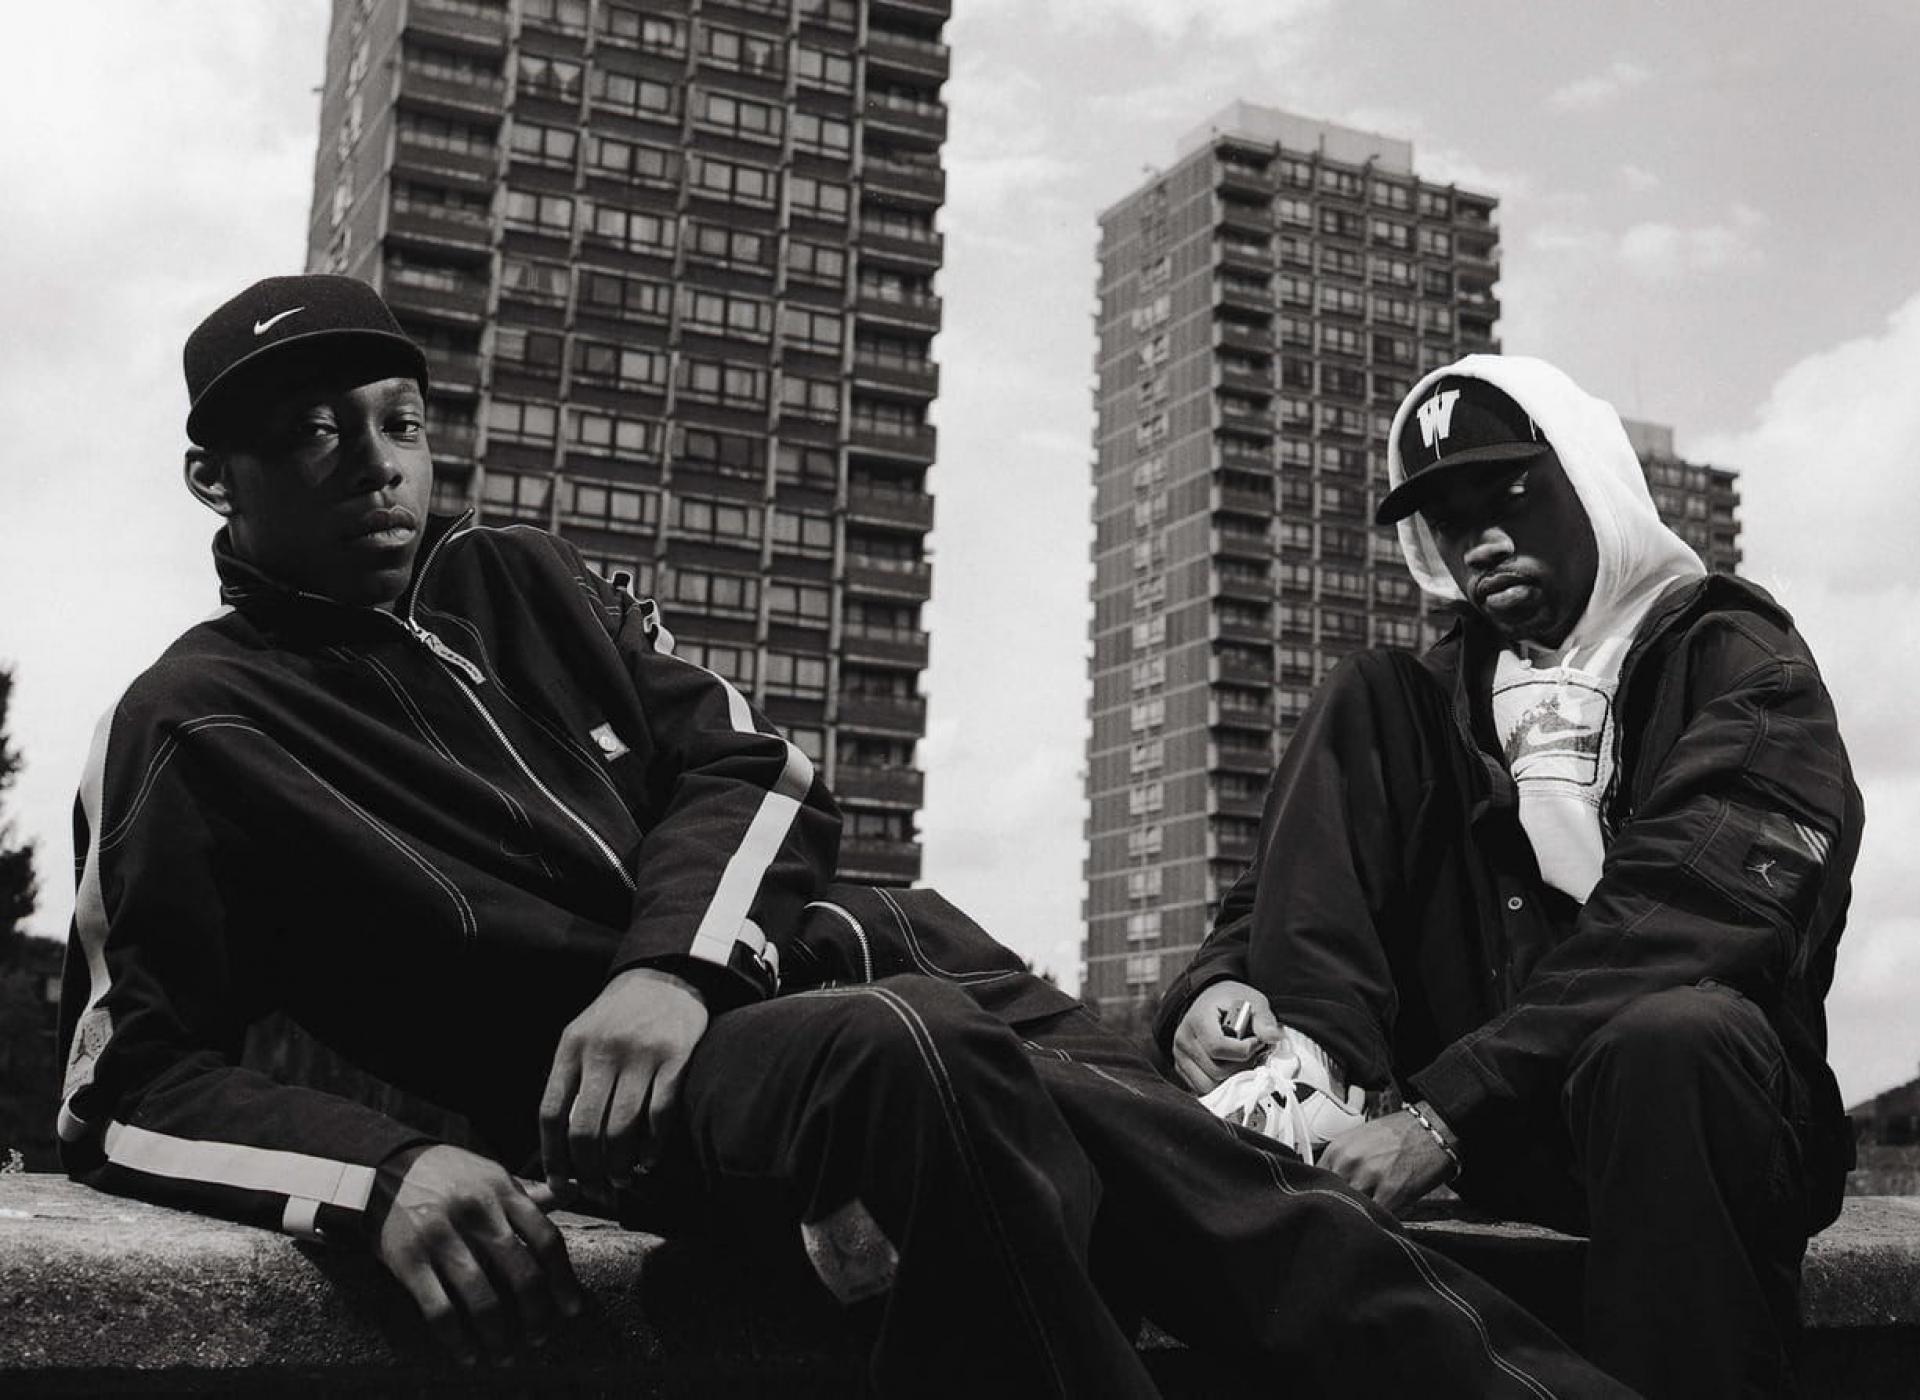 British rappers Dizzee Rascal and Wiley relax by the Crossways estate in Bethnal Green, London (2002) | Photo © avid Tonge/Getty Images